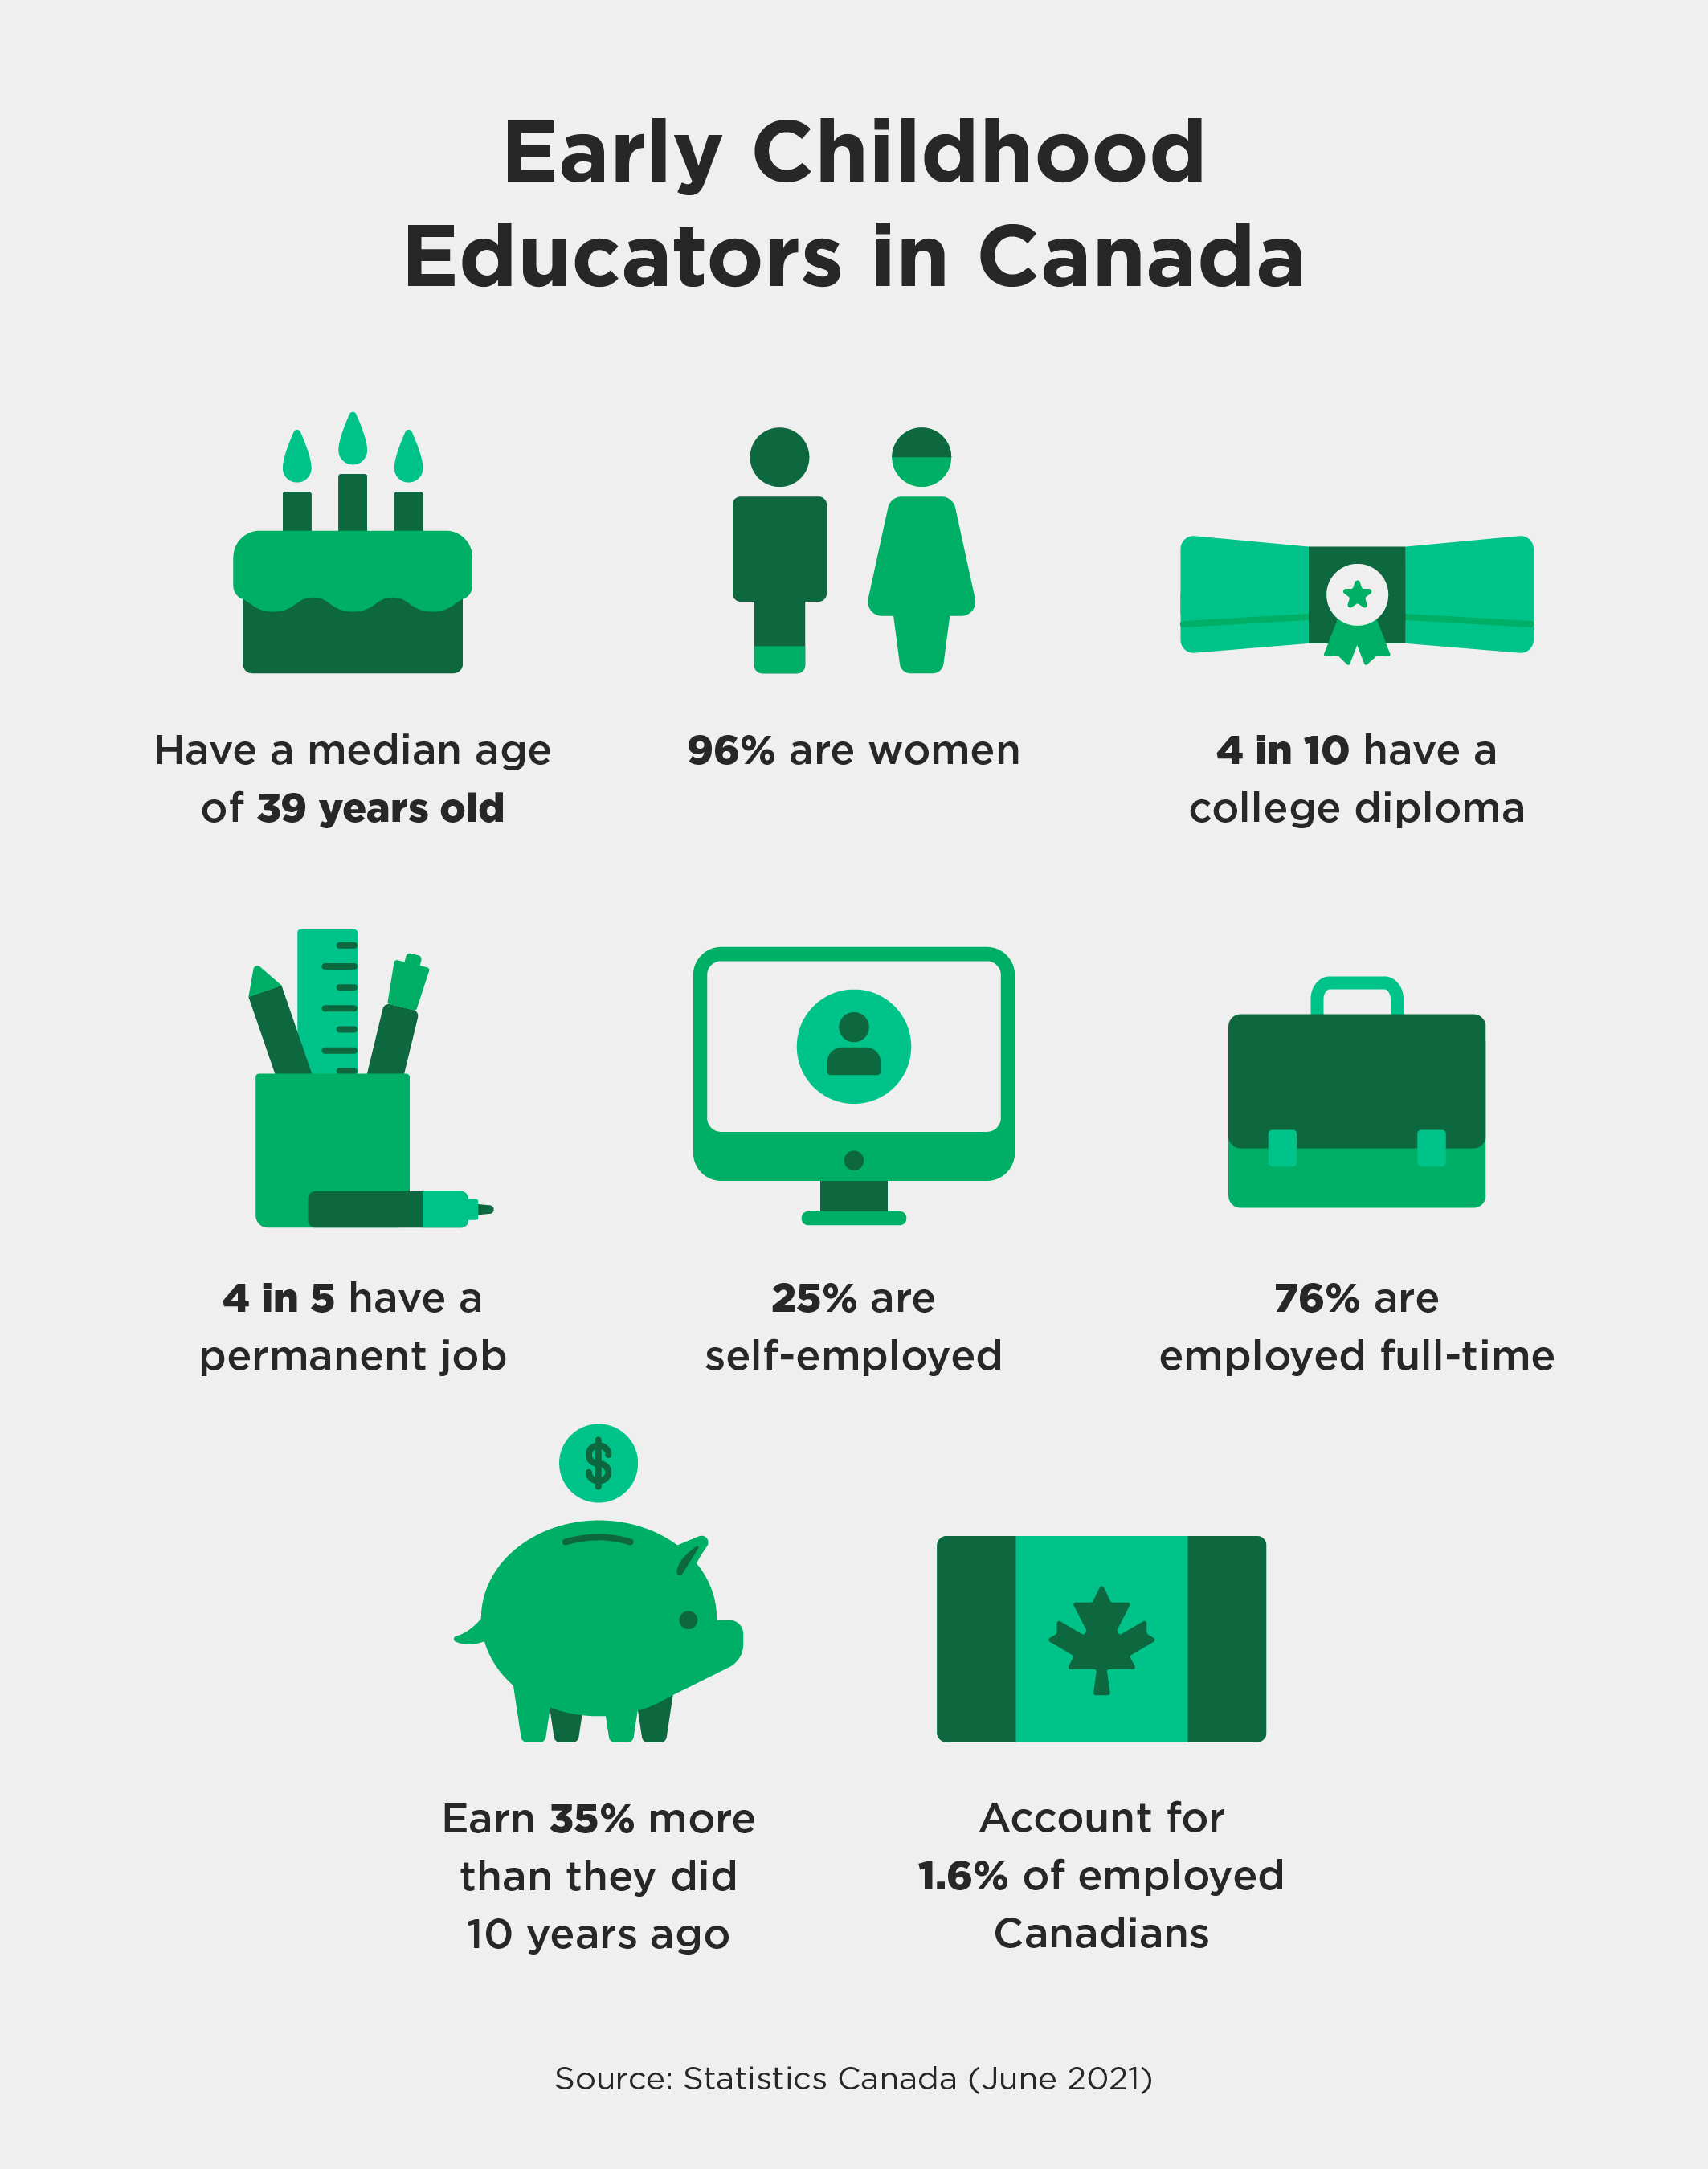 Image shares some key statistics about Early Childhood Educators in Canada with icons representing each statistic.